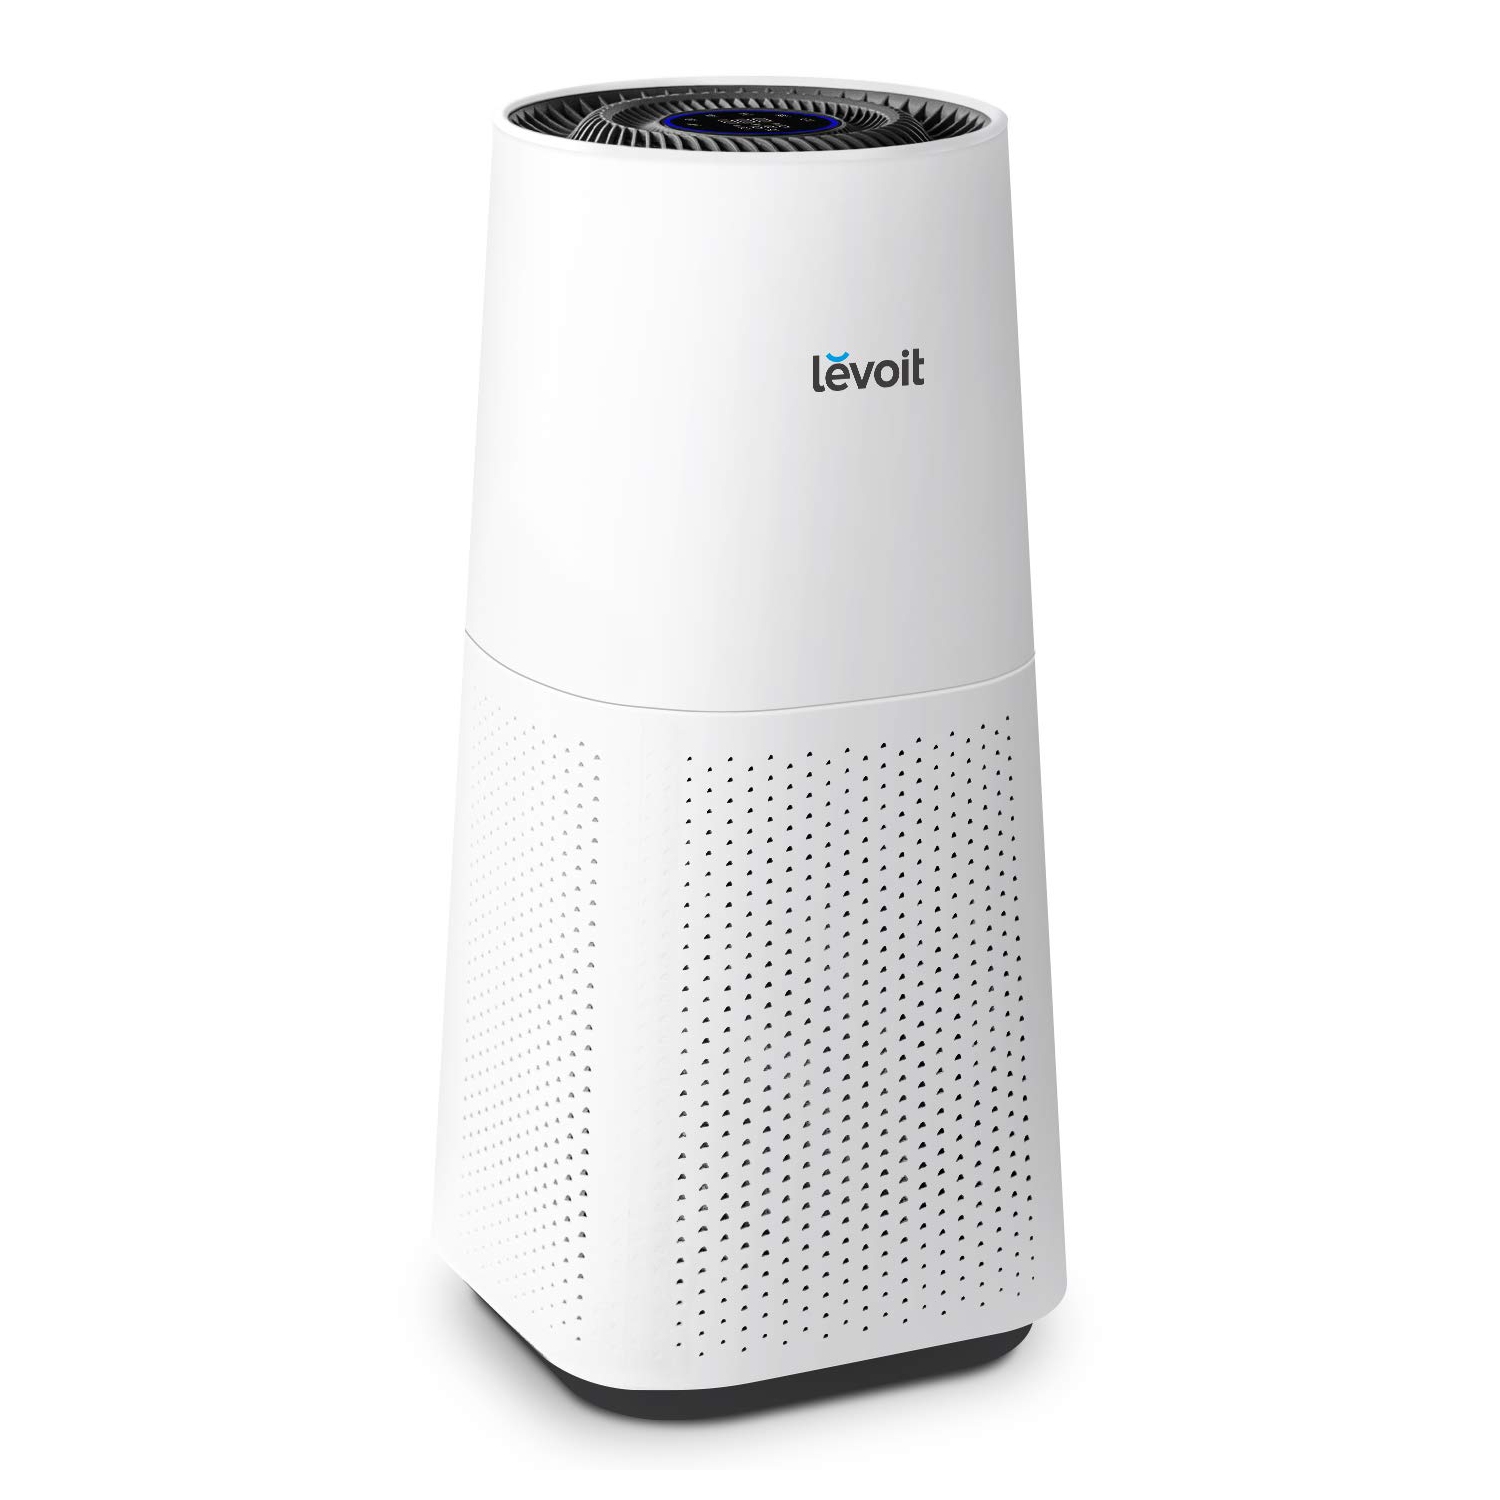 LEVOIT Air Purifier for Home Large Room with H13 True HEPA Filter for Allergies, Cleaner for Smoke Mold, Pollen, Dust, Quiet Odor Eliminators for Bedroom, Smart Sensor, Auto Mode,